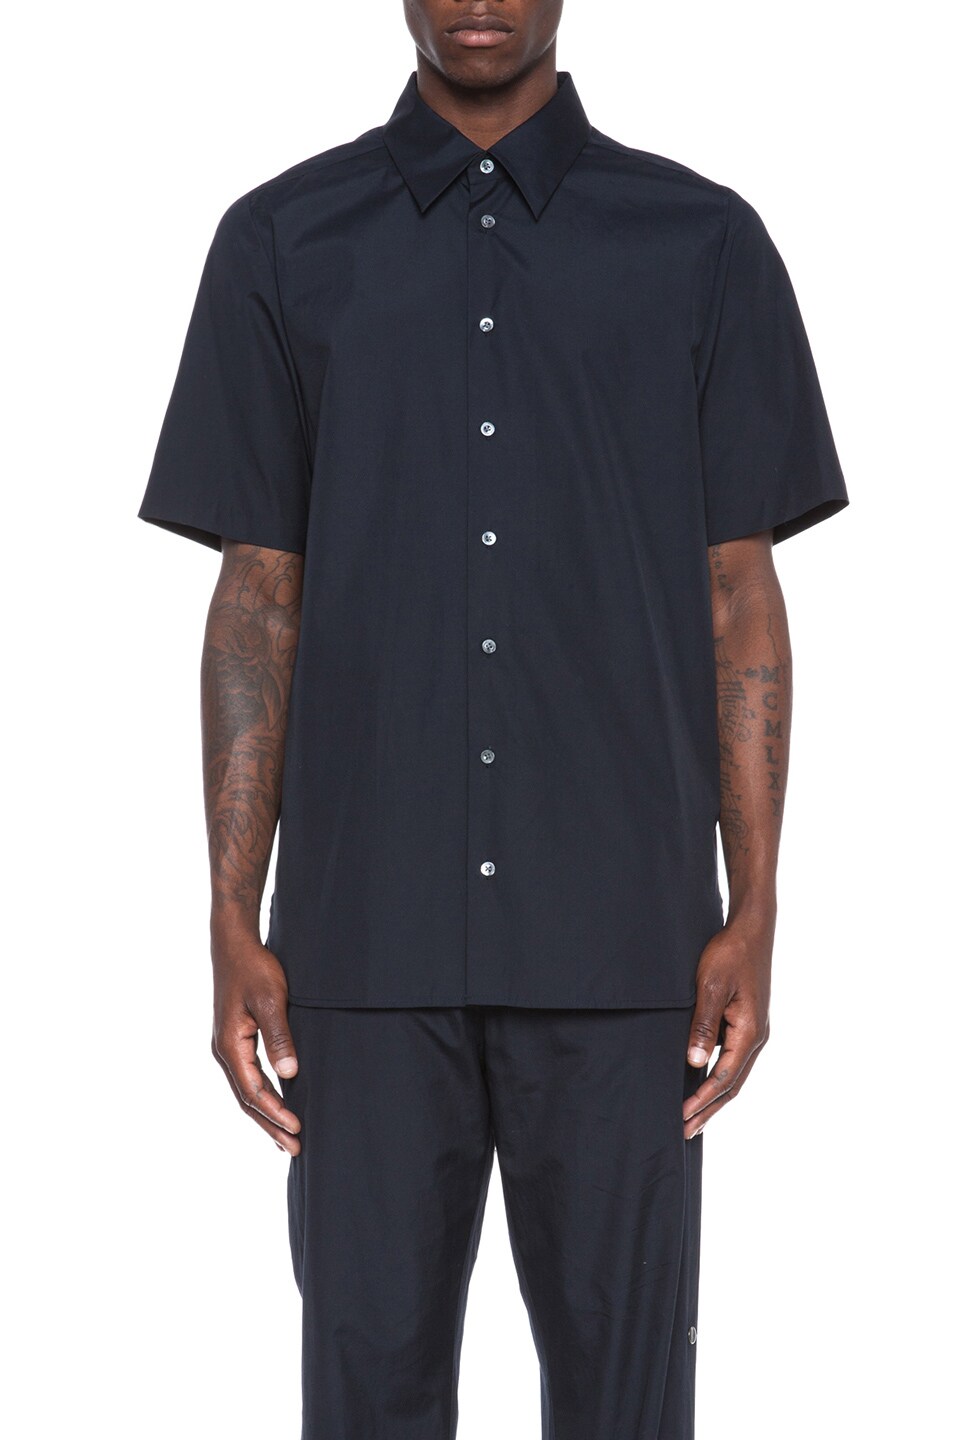 Image 1 of 3.1 phillip lim Dolman Sleeve Cotton Top in Midnight